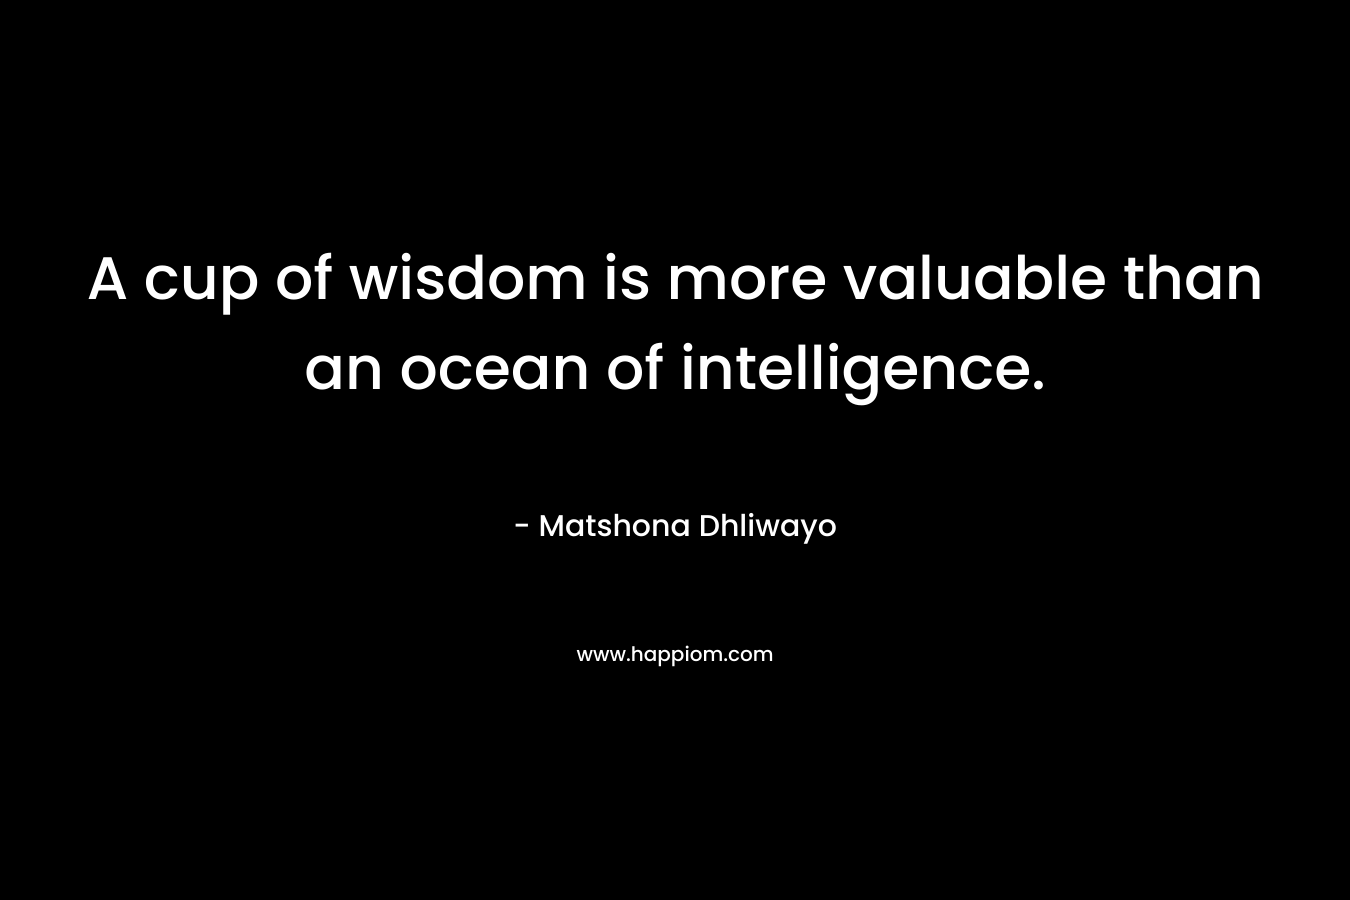 A cup of wisdom is more valuable than an ocean of intelligence.